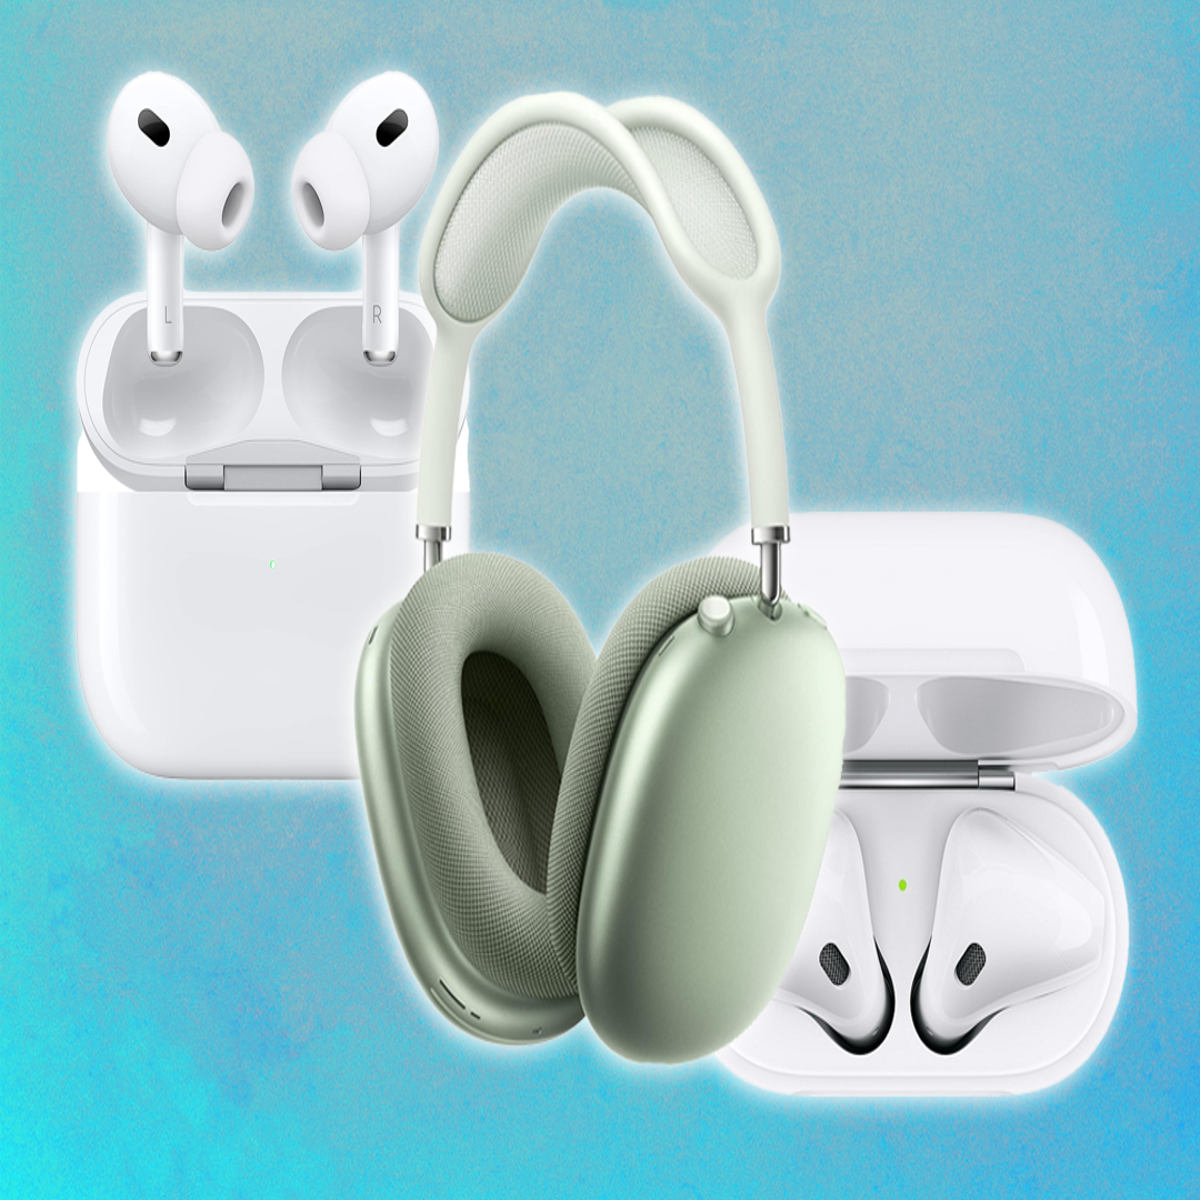 Apple AirPods Max 2: Everything we know so far